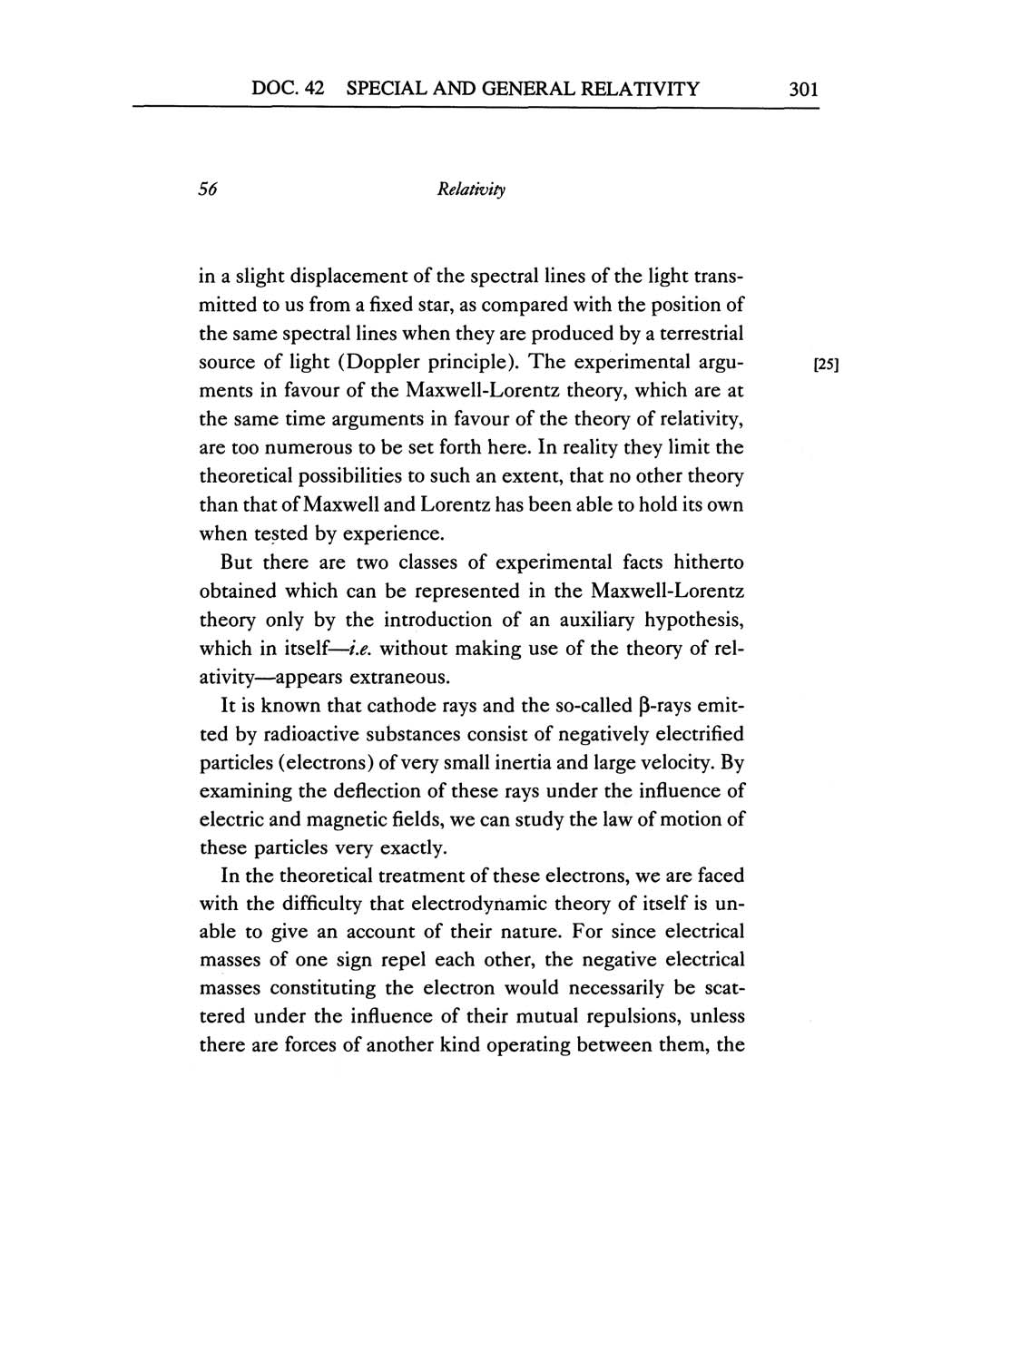 Volume 6: The Berlin Years: Writings, 1914-1917 (English translation supplement) page 301